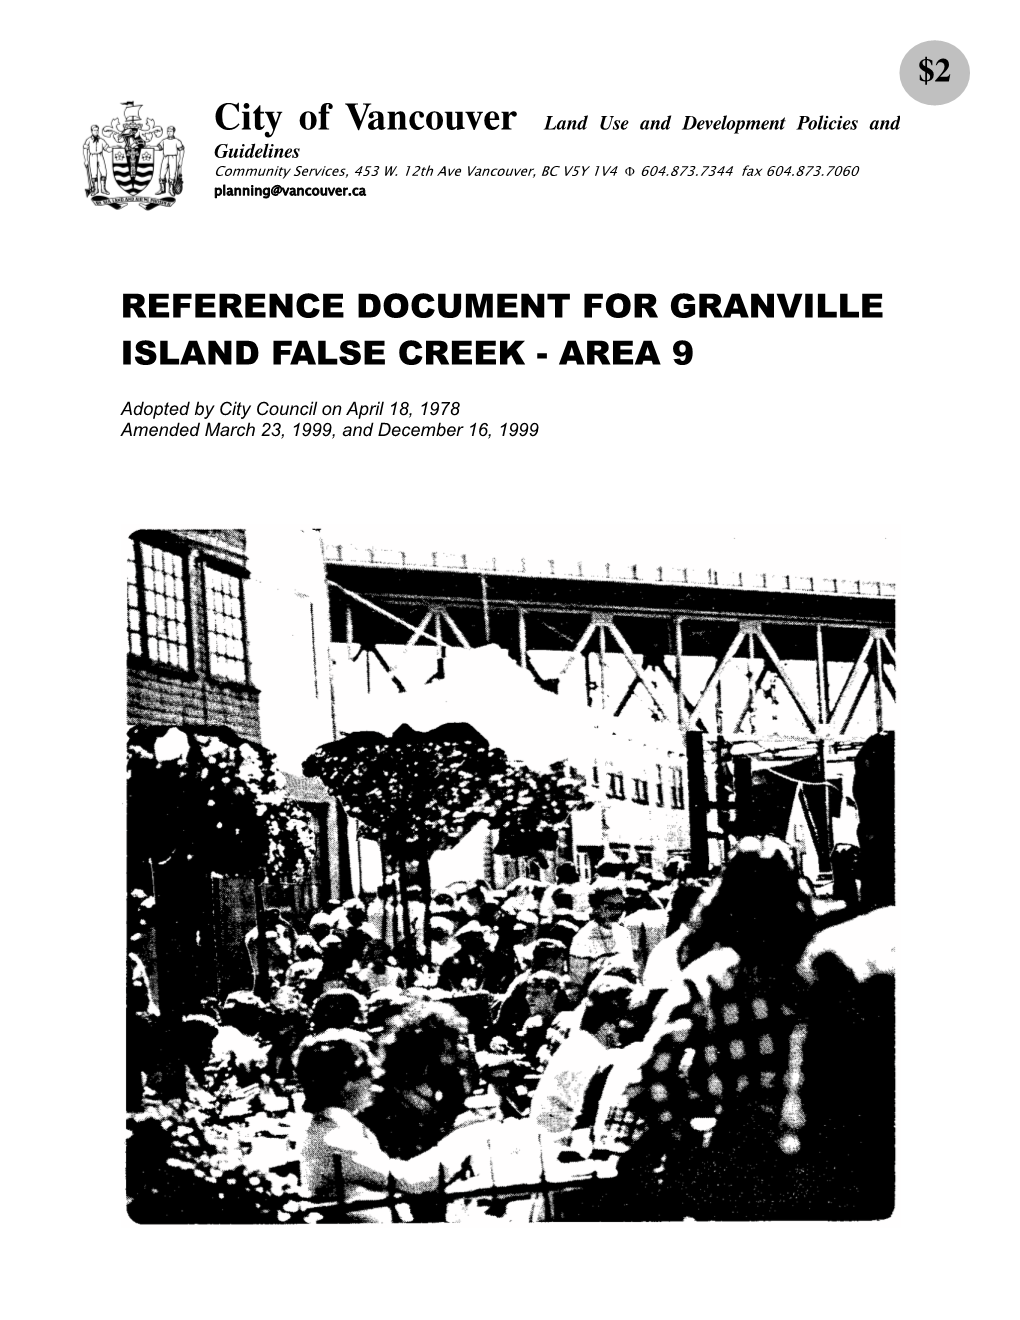 Reference Document for Granville Island False Creek - Area 9